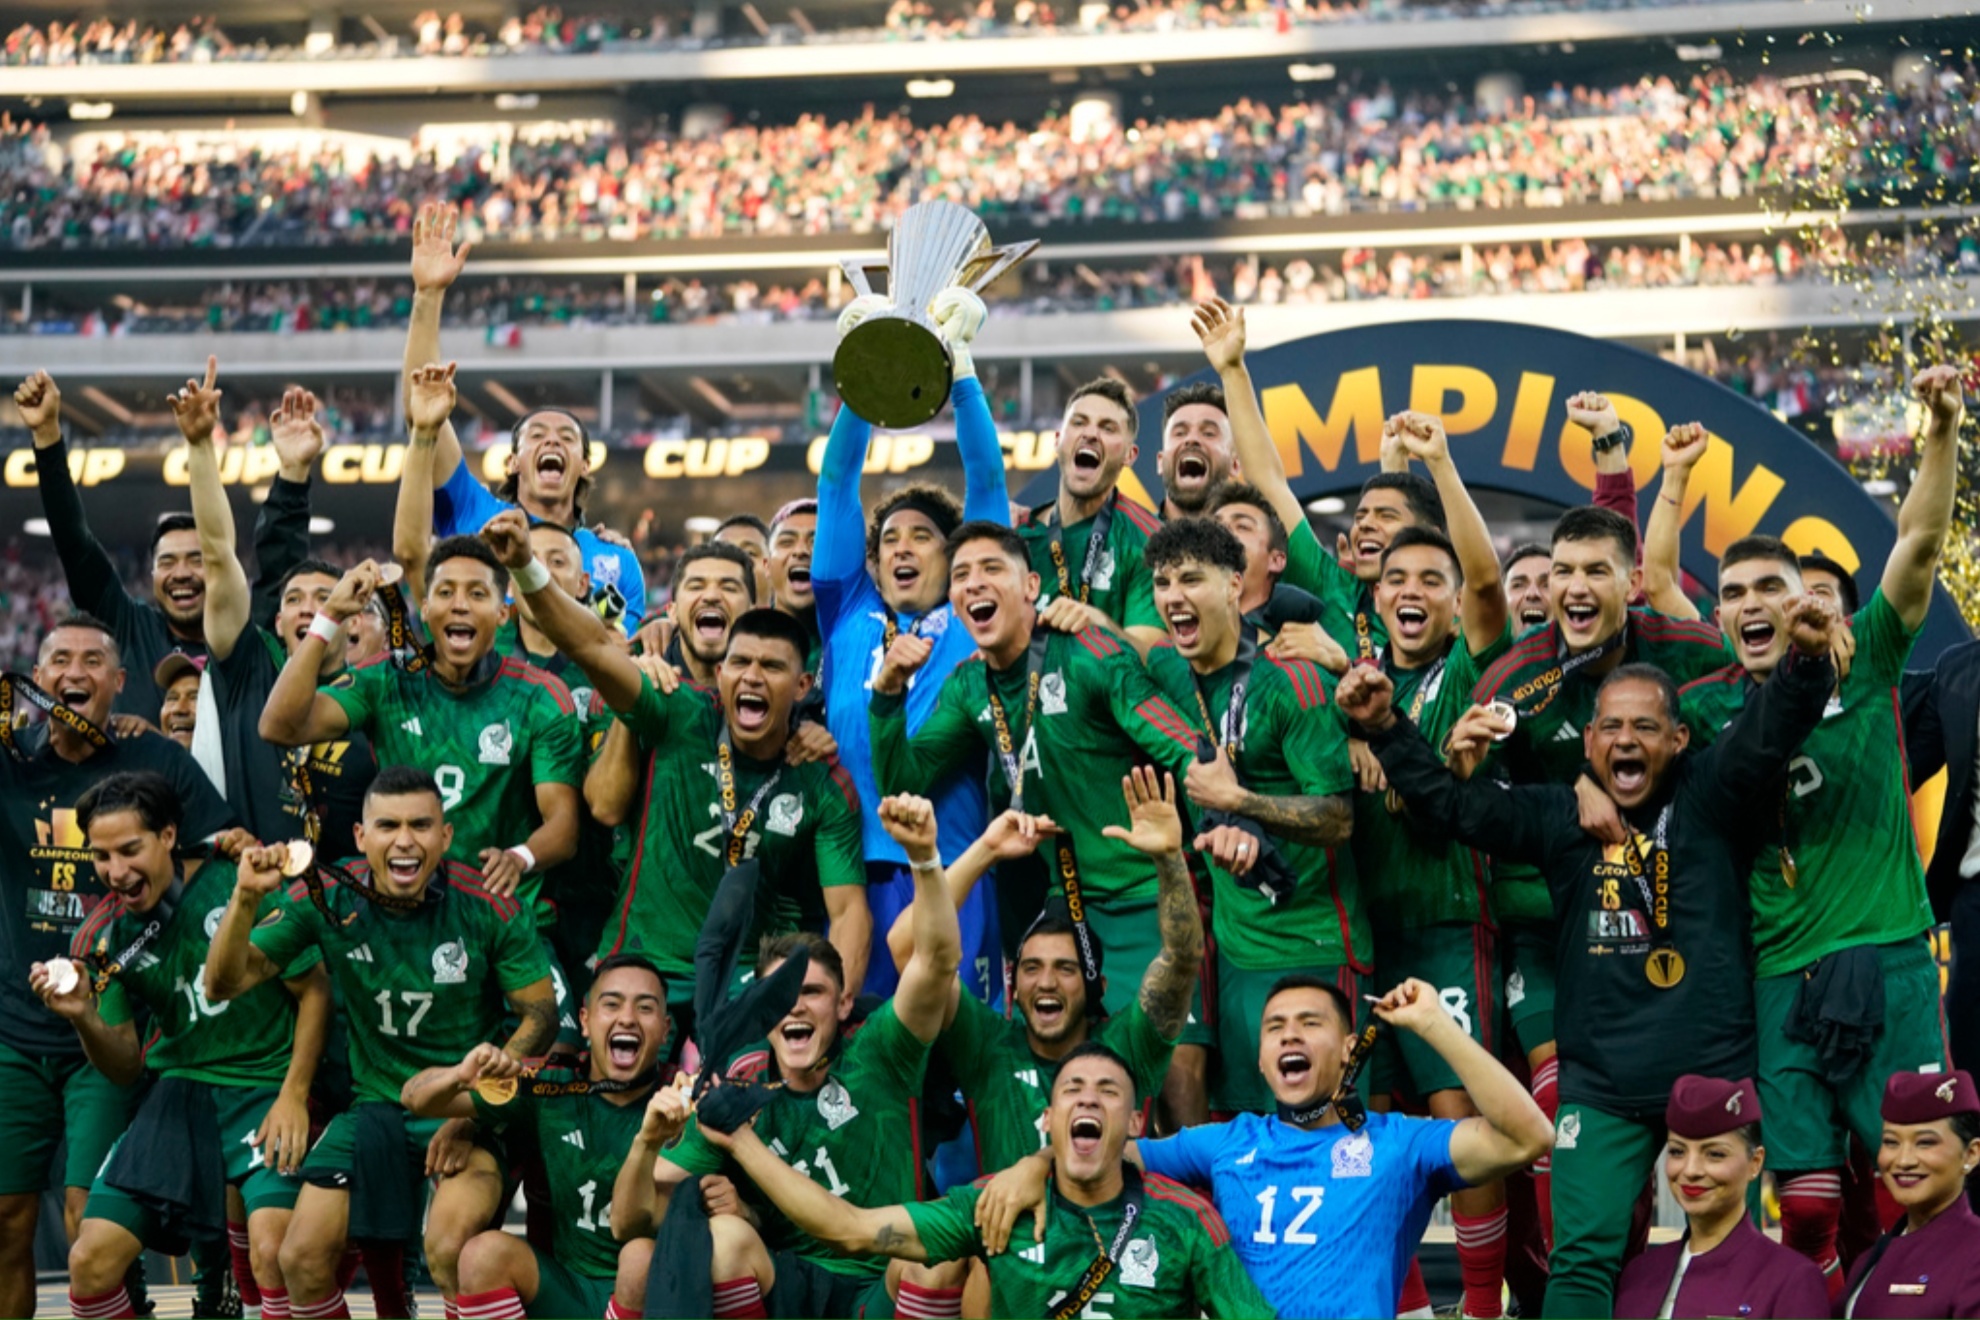 The Mexican National Team can no longer use the El Tri moniker